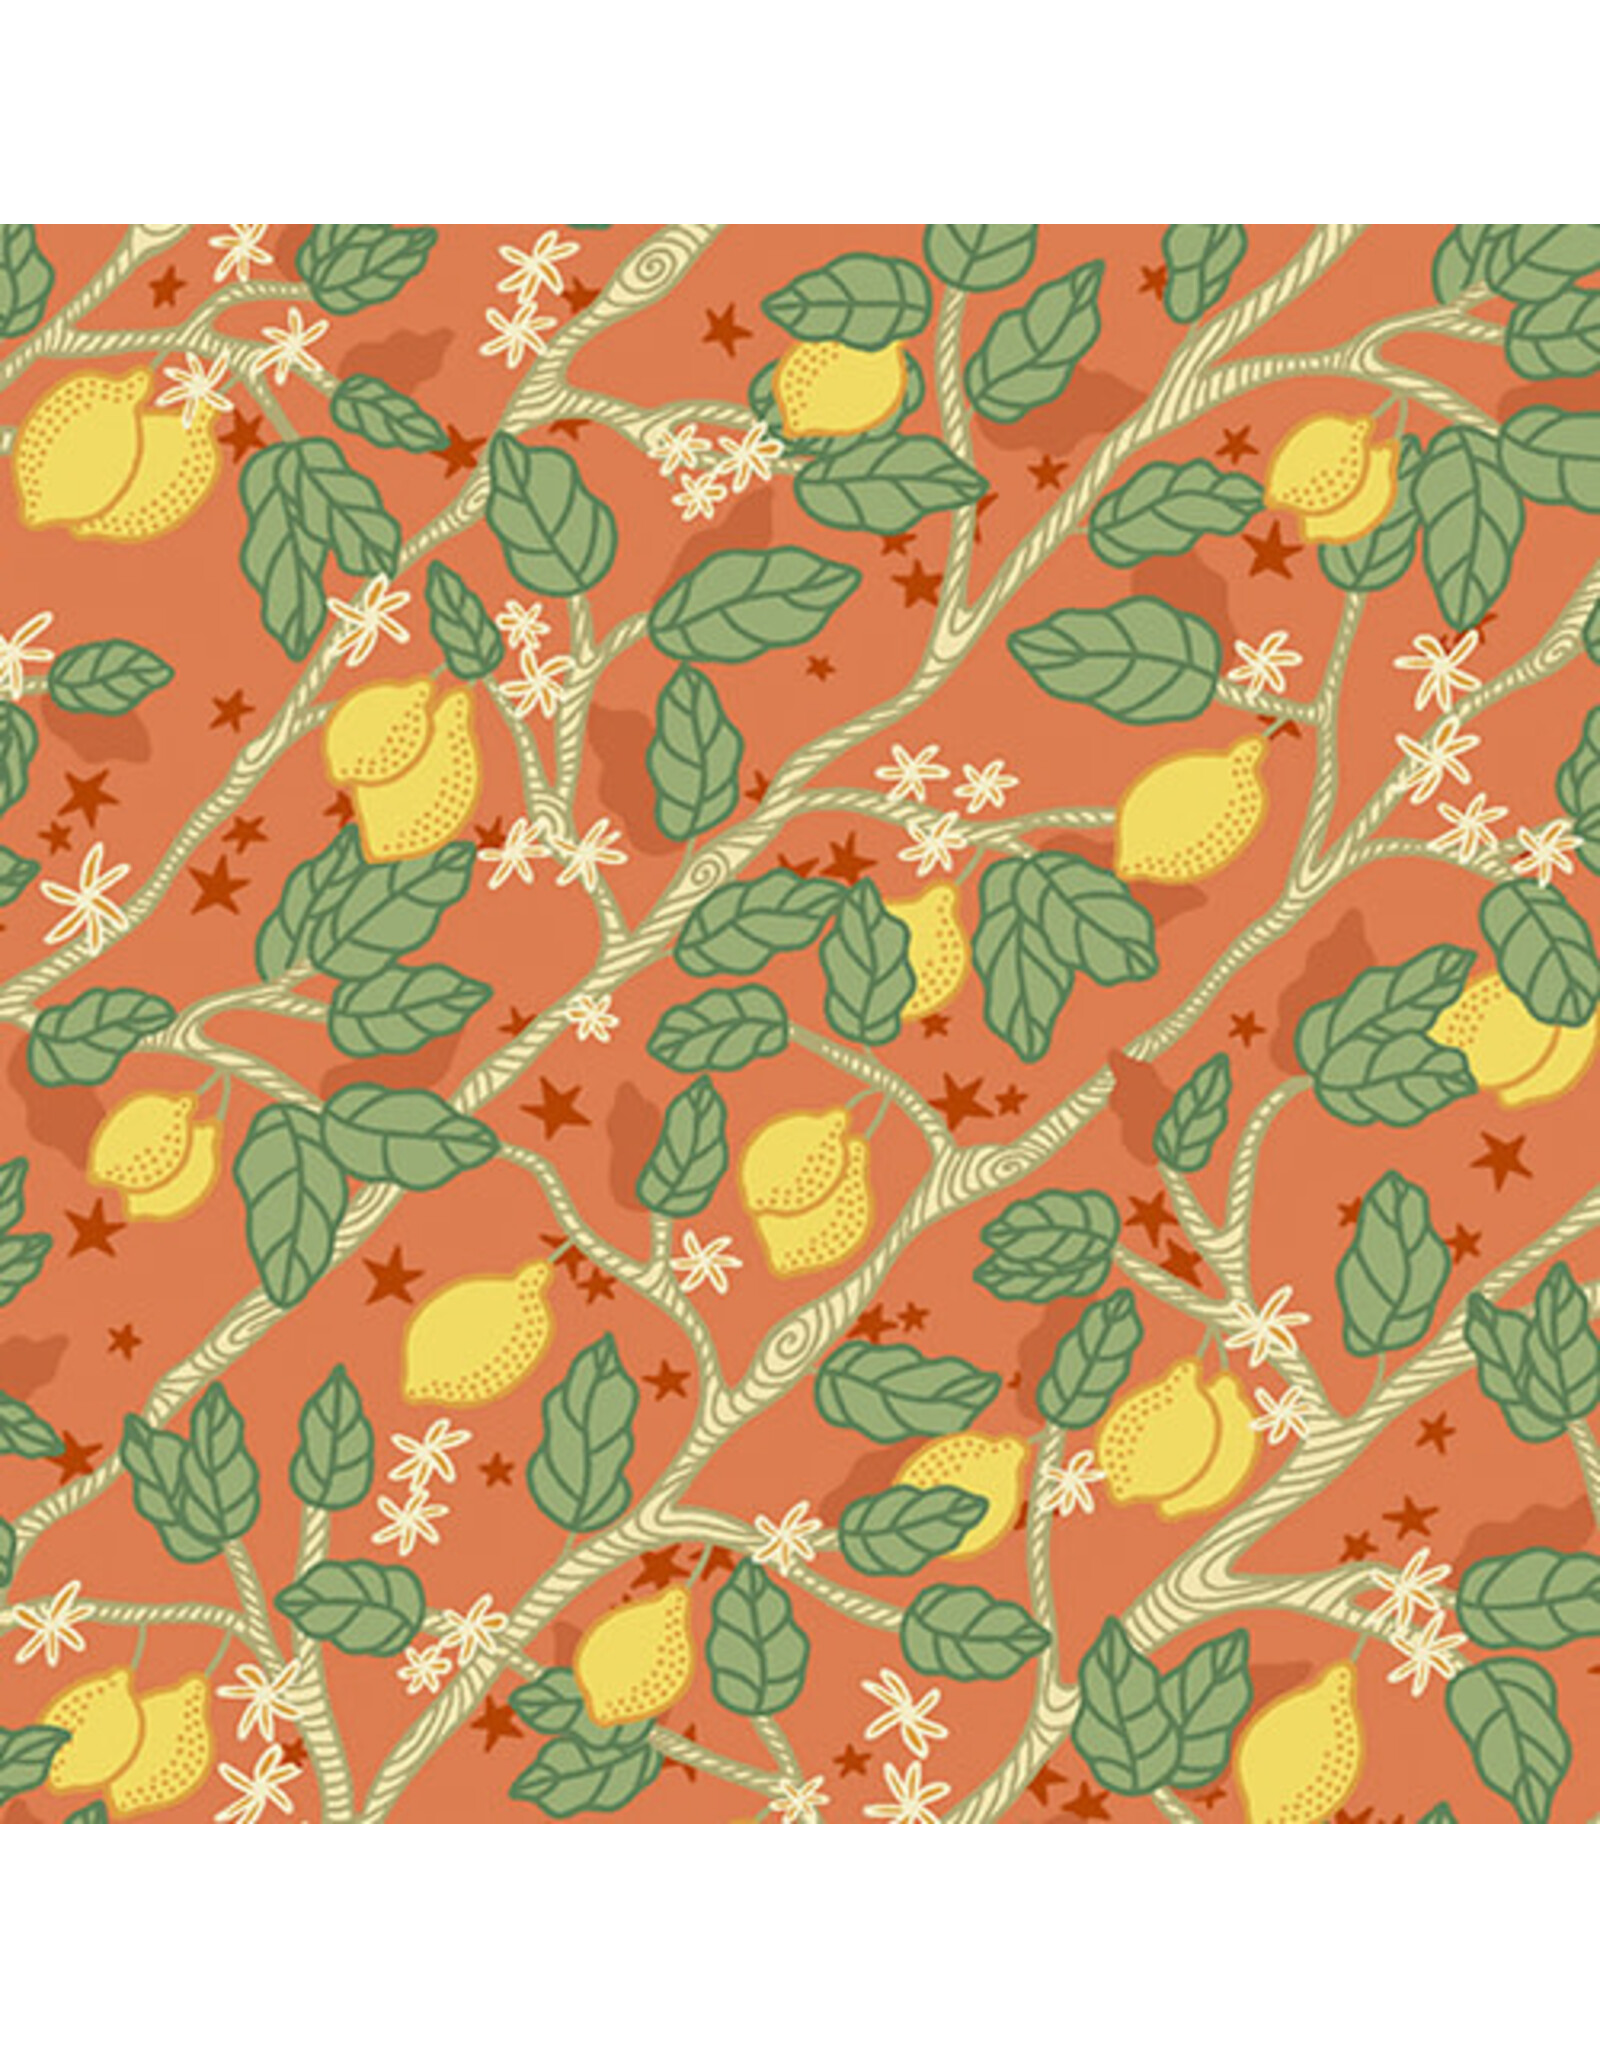 Eye Candy Quilts Ciao Bella, Limoni in Coral, Fabric Half-Yards